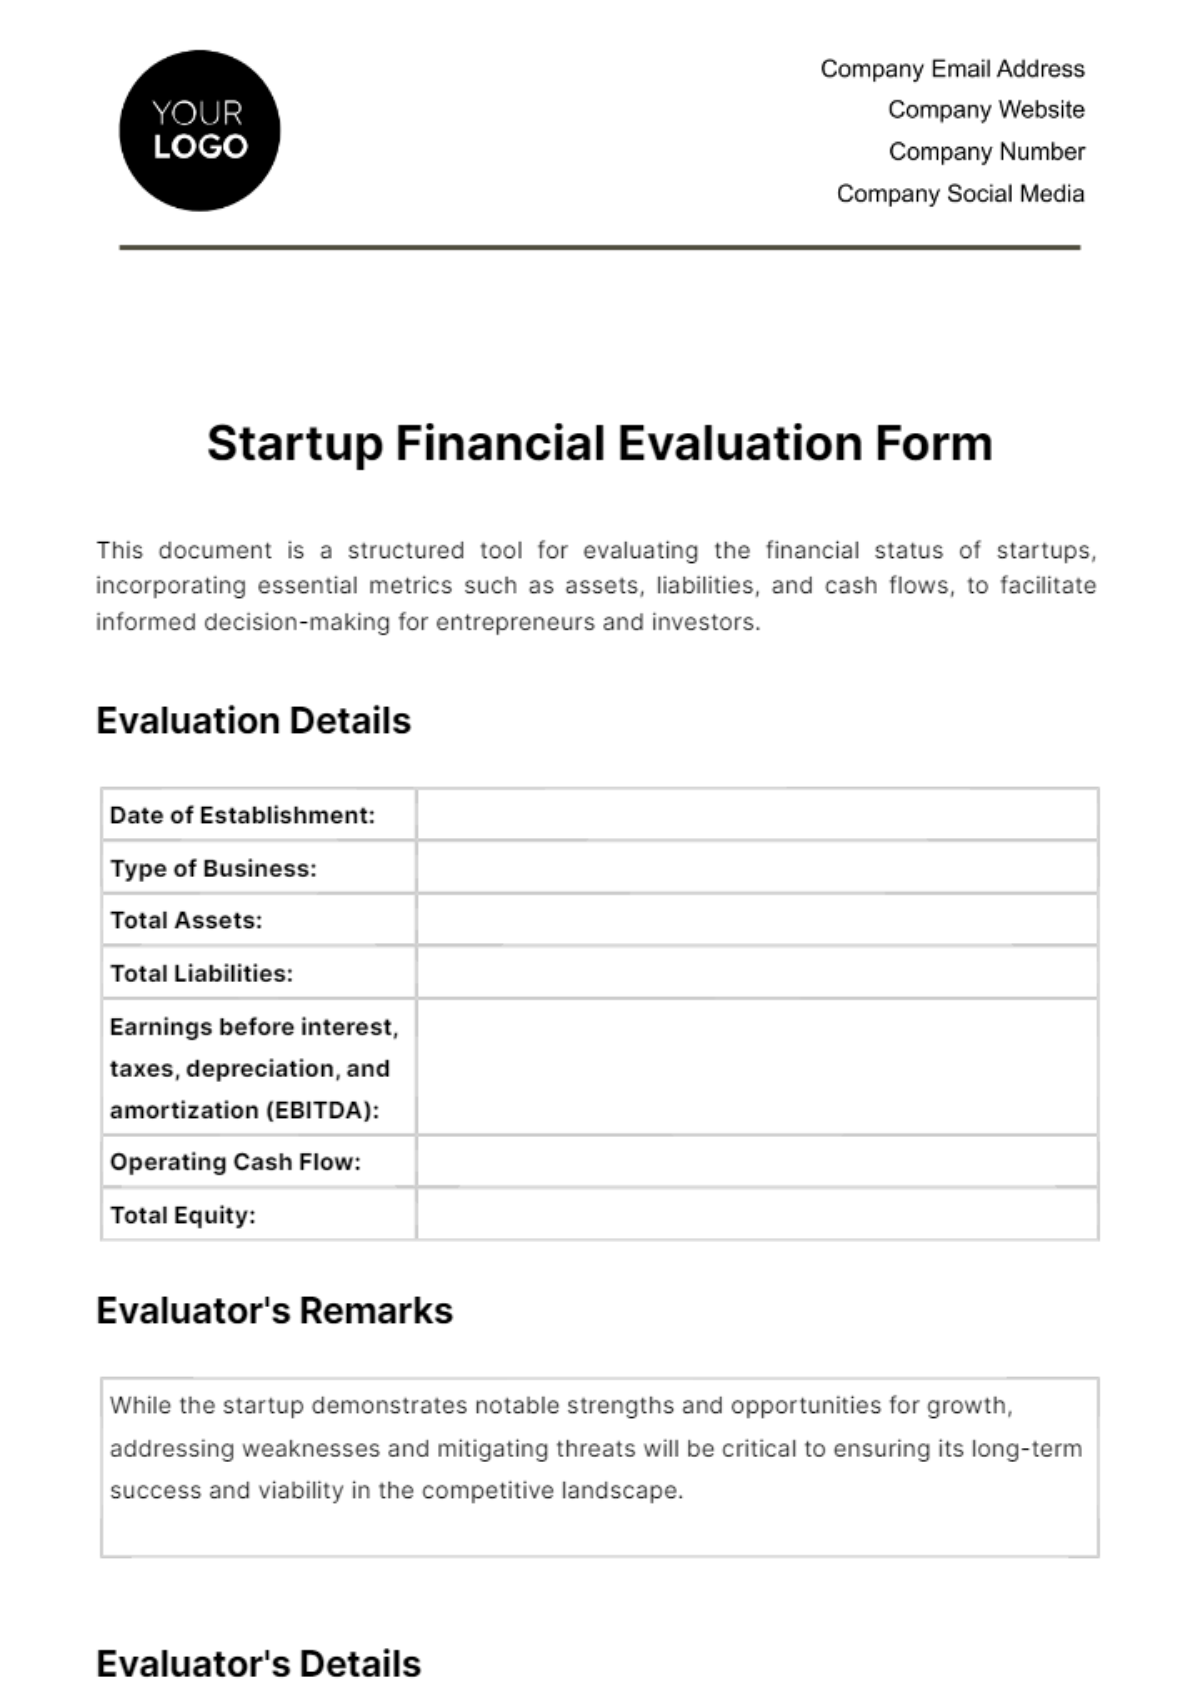 Free Startup Financial Evaluation Form Template